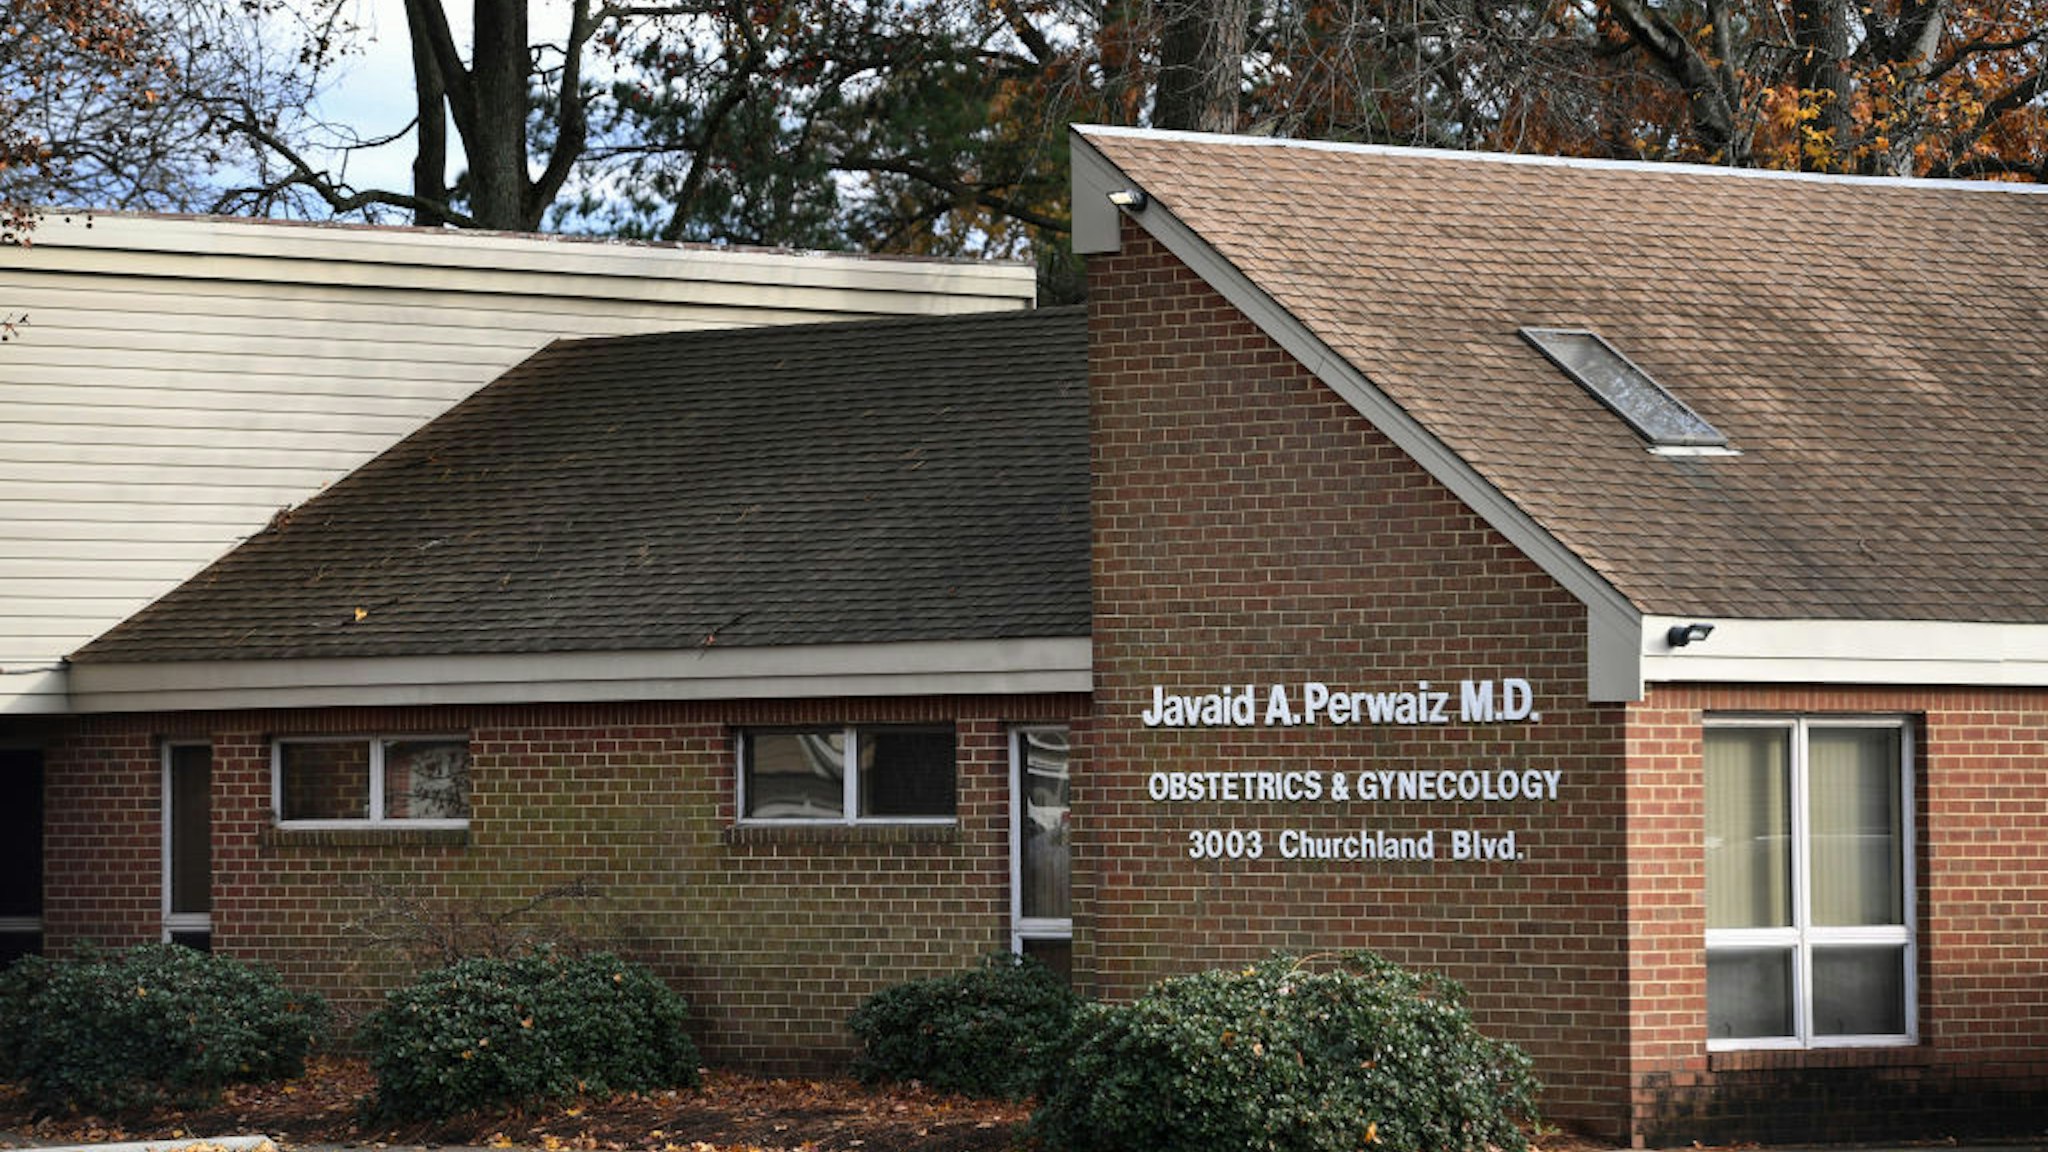 Offices where Dr. Javaid Perwaiz used to work out of are seen on Monday December 02, 2019 in Chesapeake, VA.